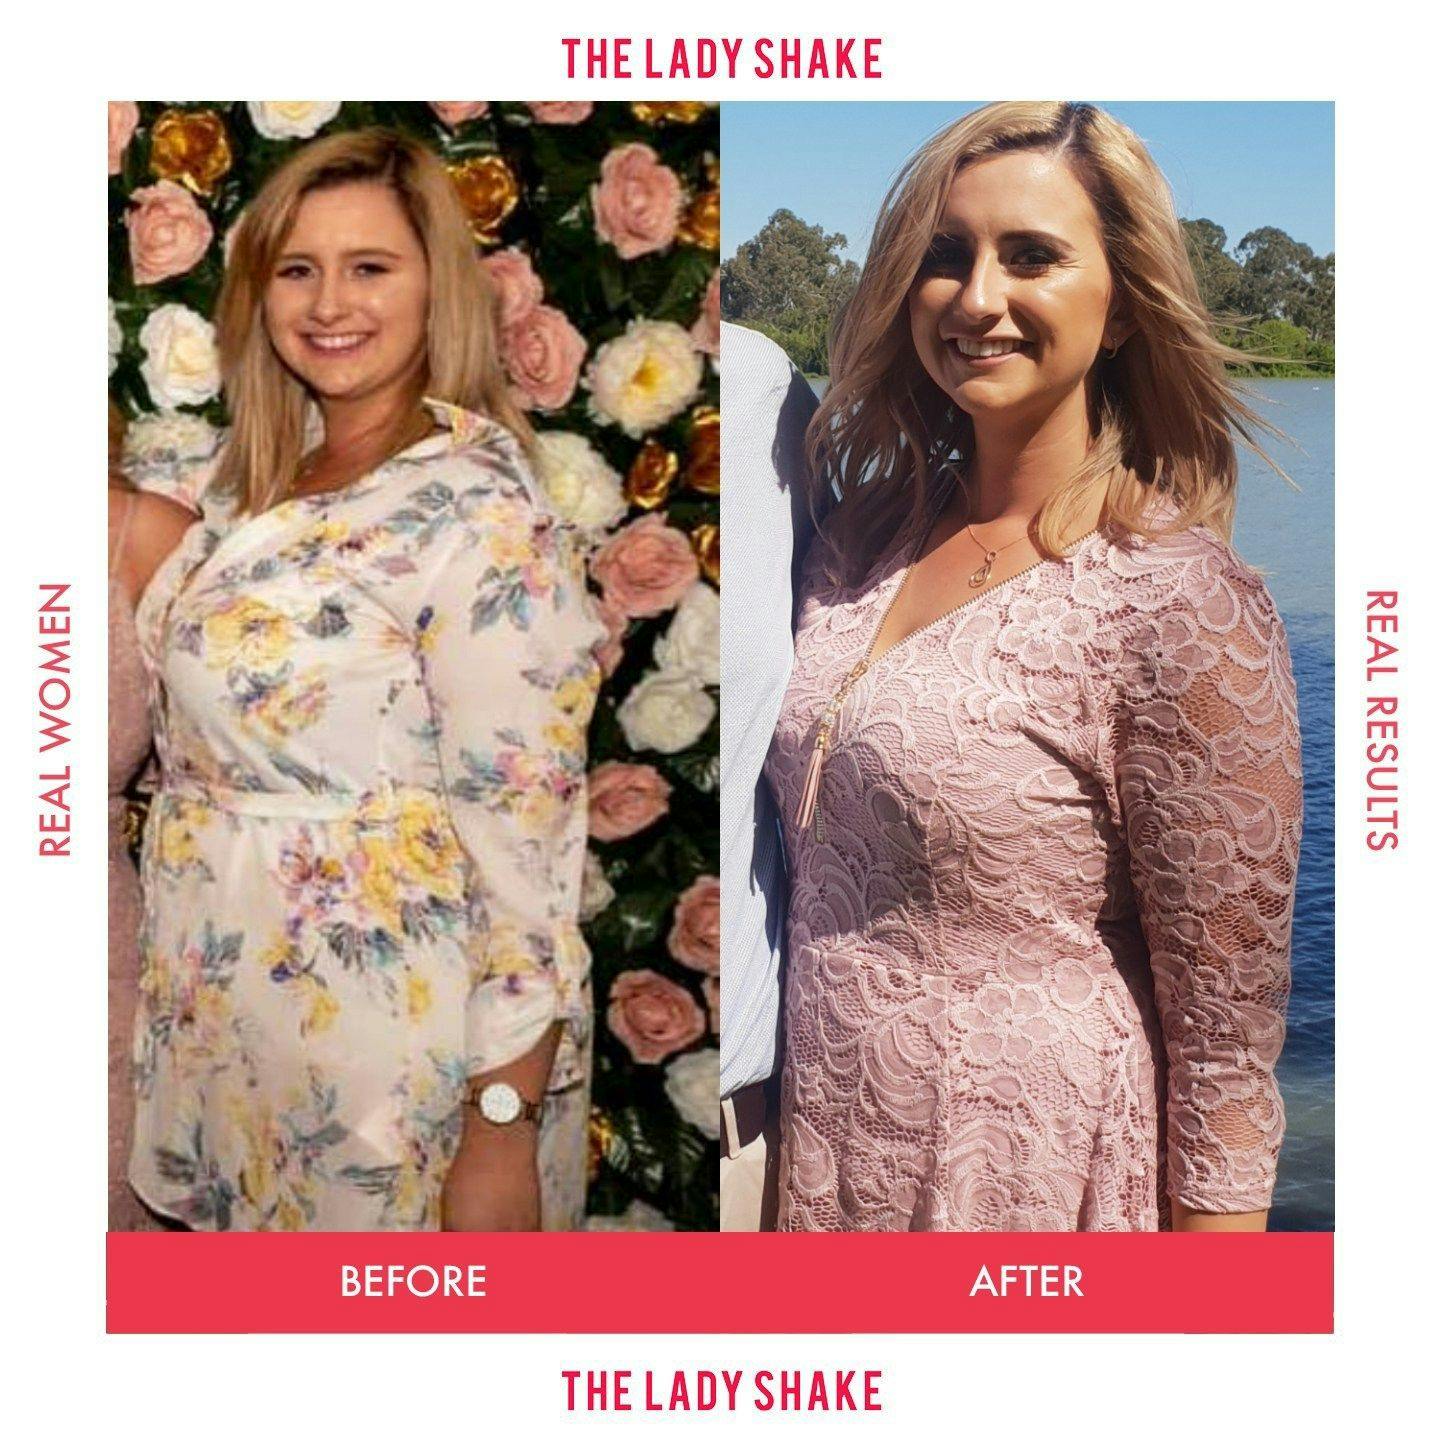 Nicole lost 33kg, reaching her goal weight!